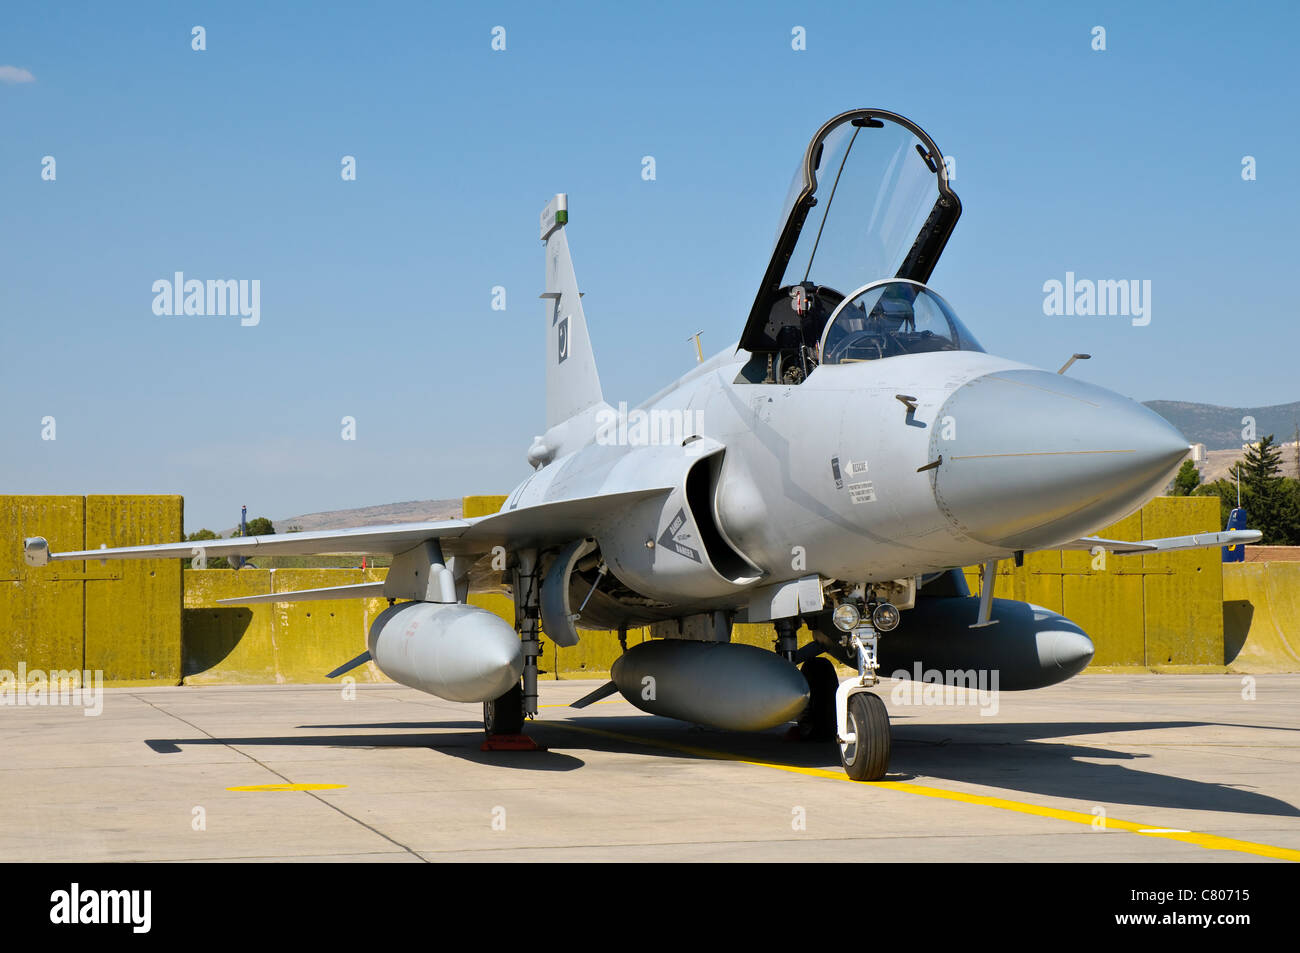 A JF-17 Thunder of the Pakistan Air Force at the Izmir Air Show 2011 in Turkey, celebrating 100 years of the Turkish Air Force. Stock Photo